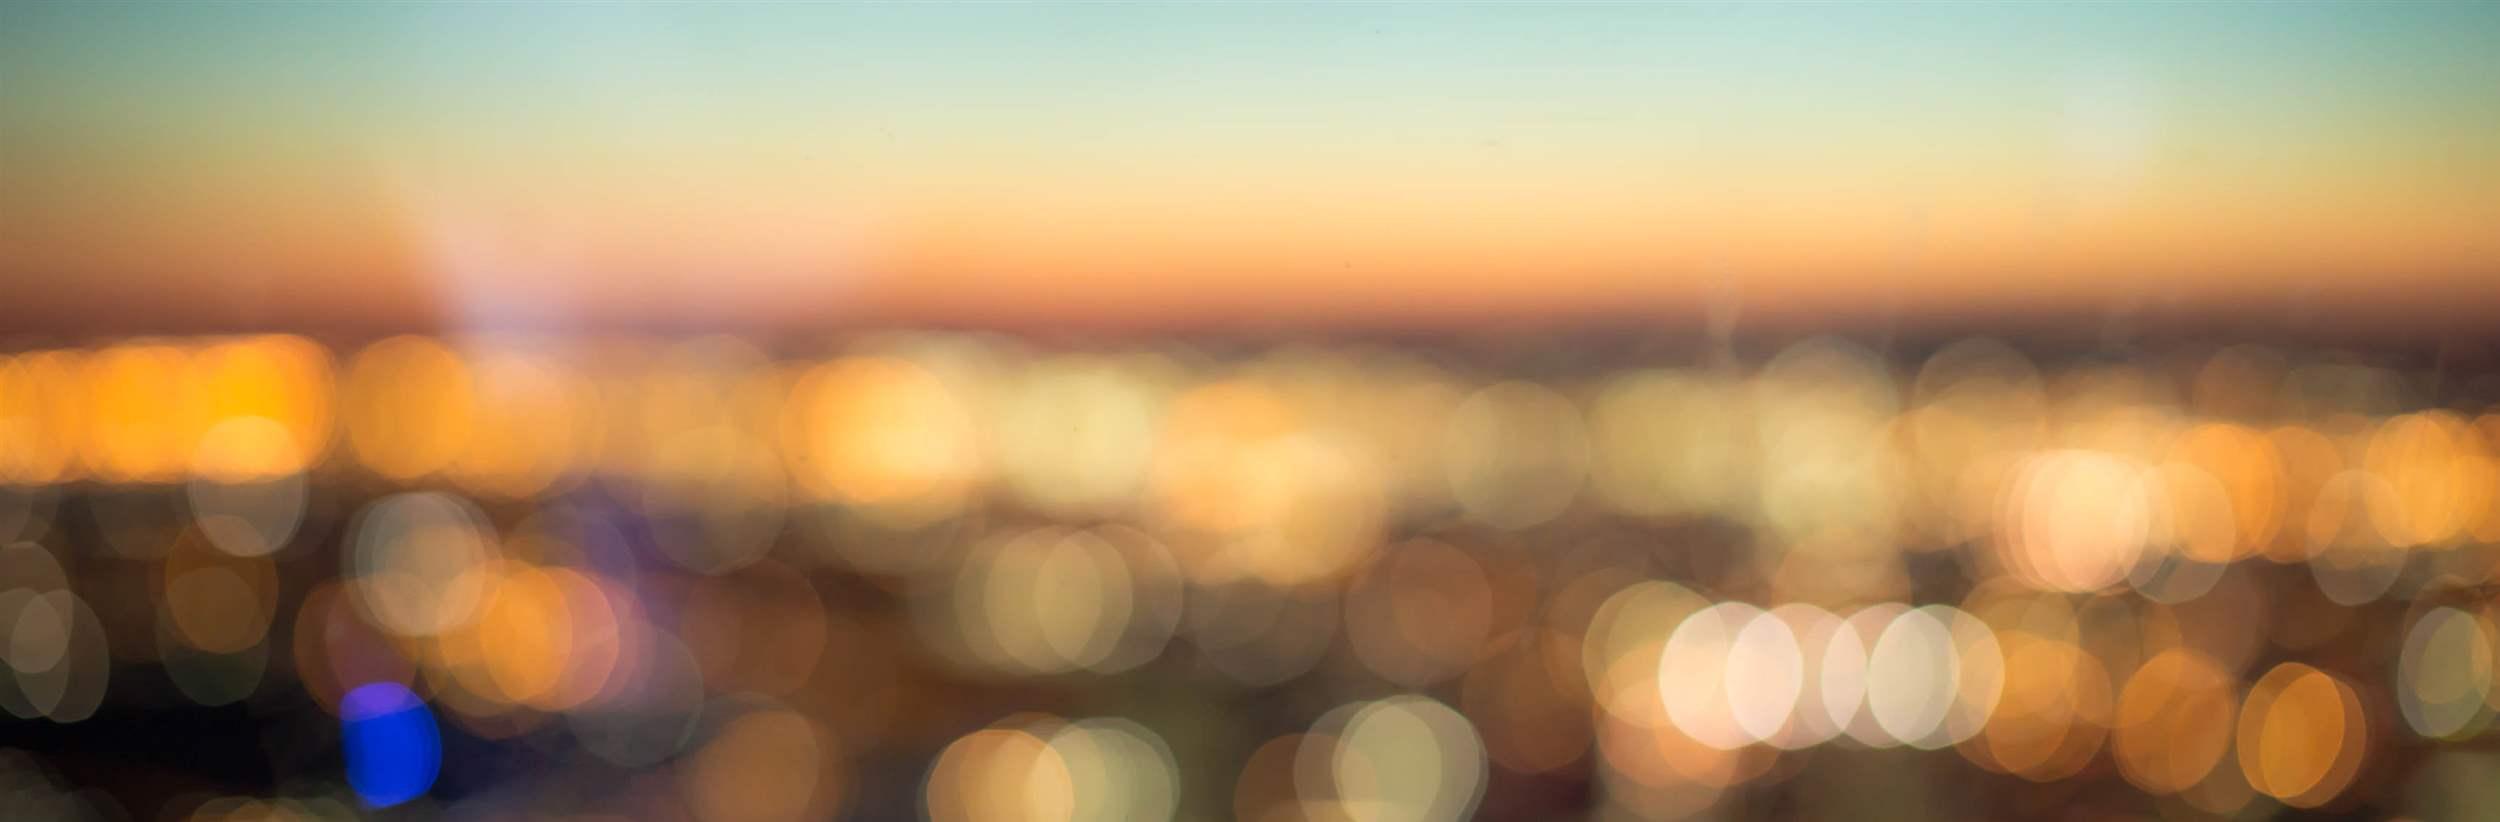 abstract blurred aerial view of sunset over city